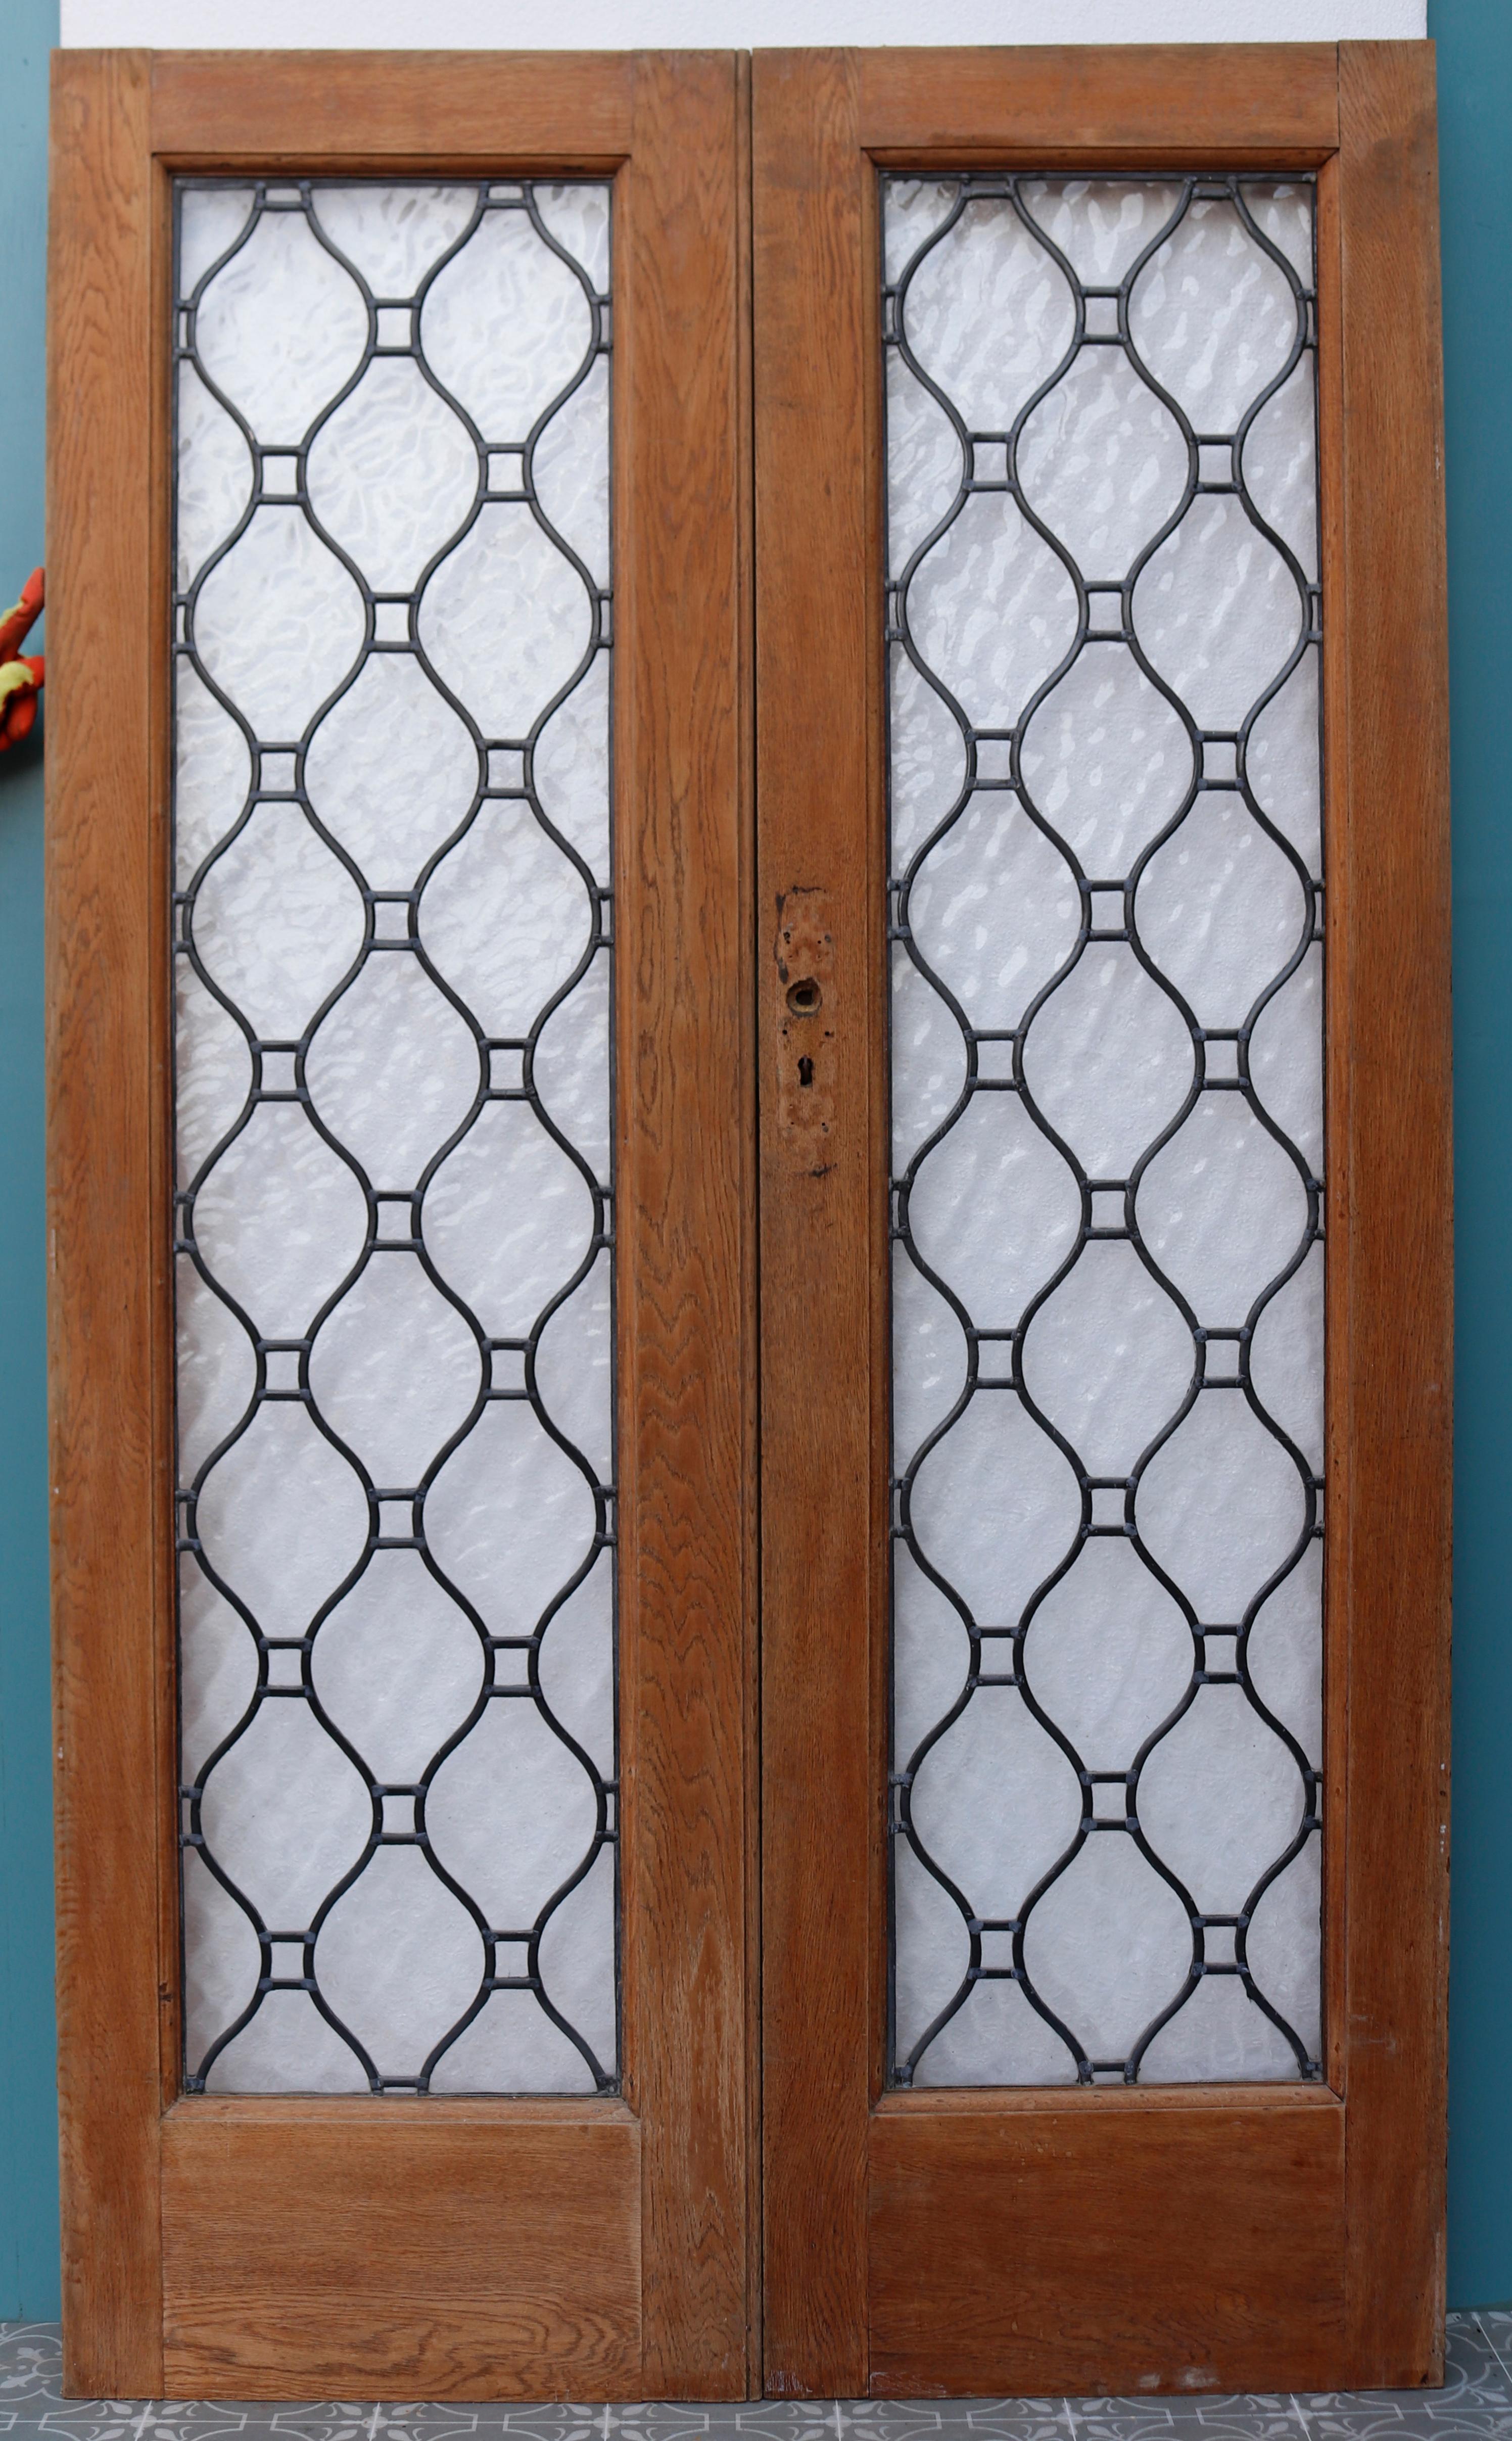 A set of oak double doors with leaded textured glass panels. We have two sets available.
   